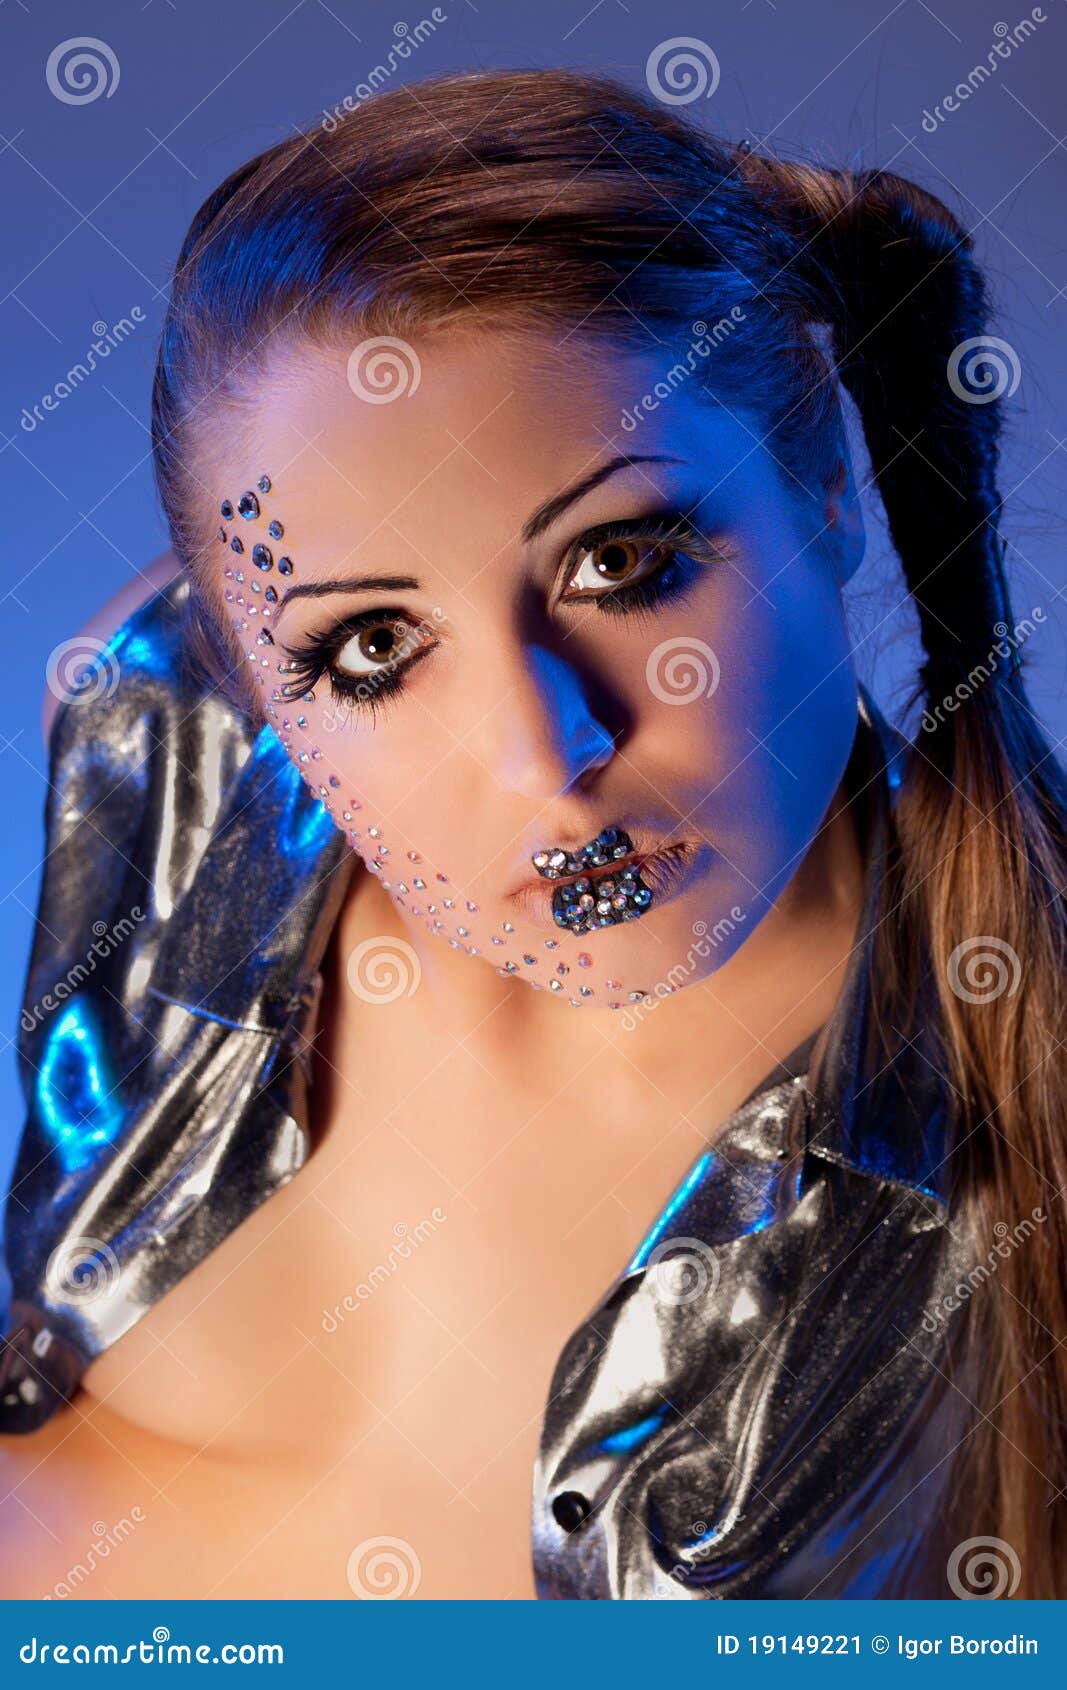 Woman With Crystal Glamour Stock Image - Image: 19149221